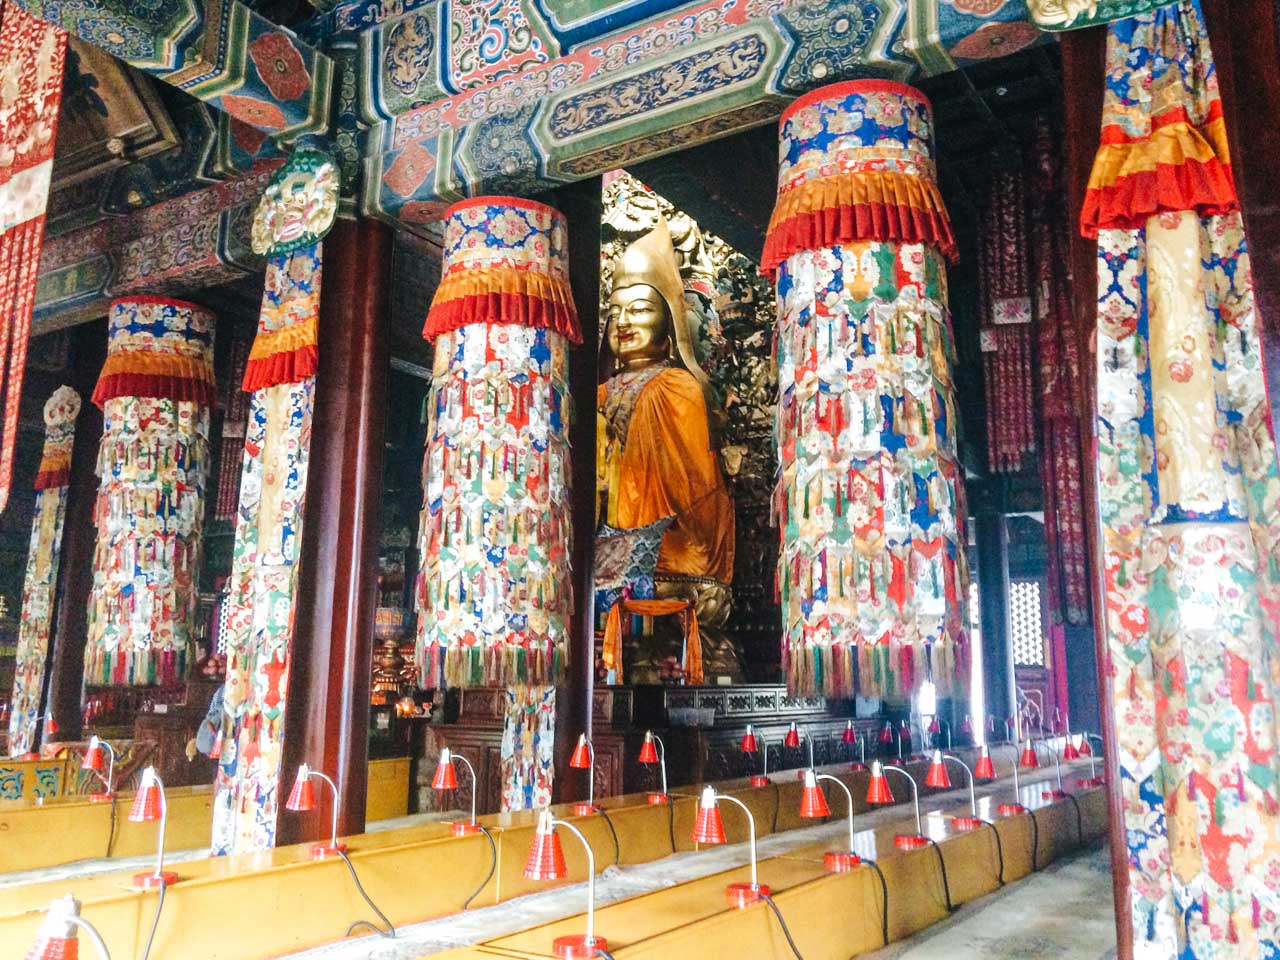 A Tsongkhapa statue inside one of the halls at the Yonghegong Lama Temple in Beijing, China